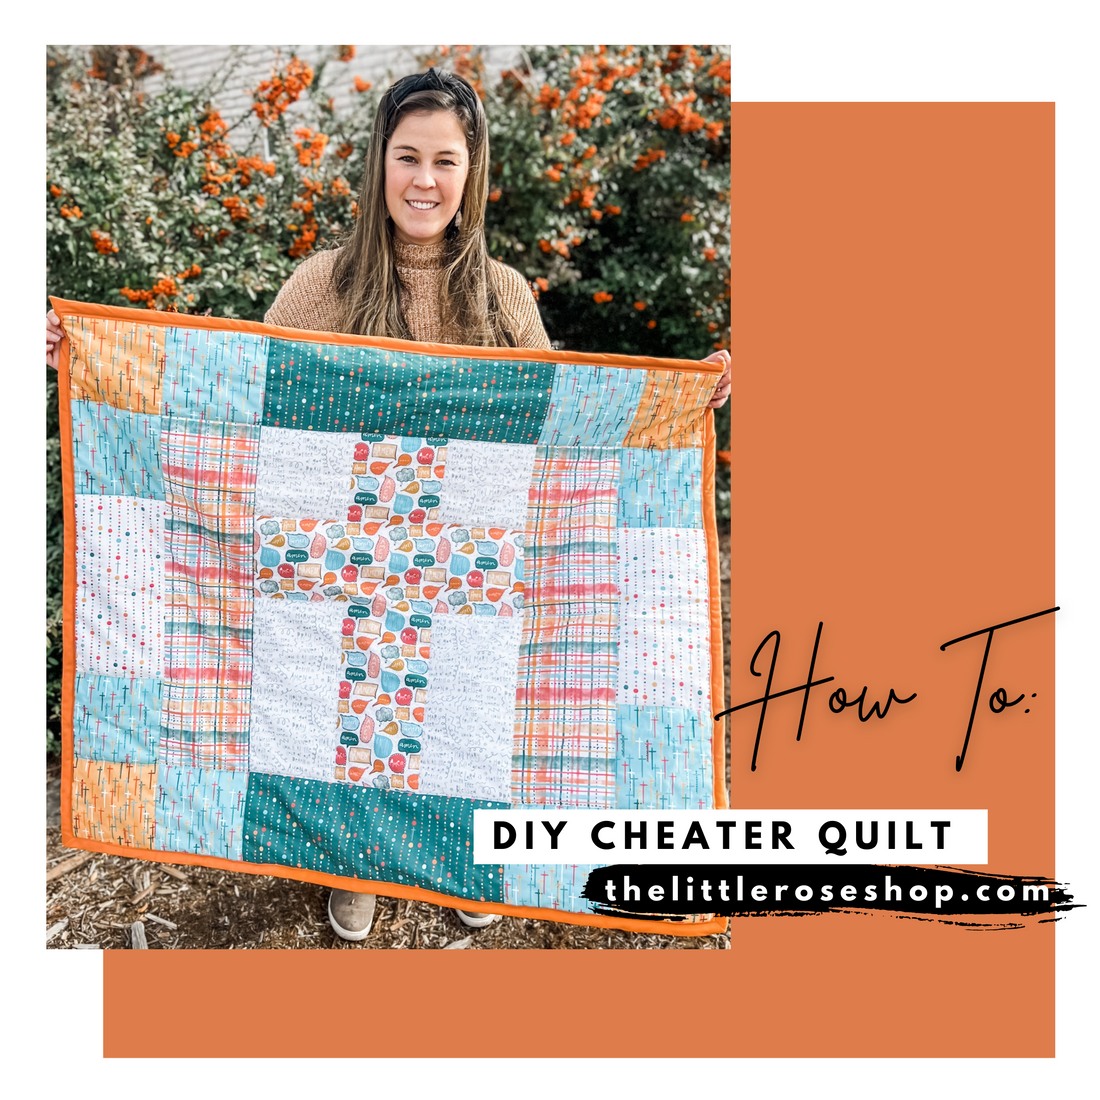 How To: DIY Cheater Quilt on Spoonflower